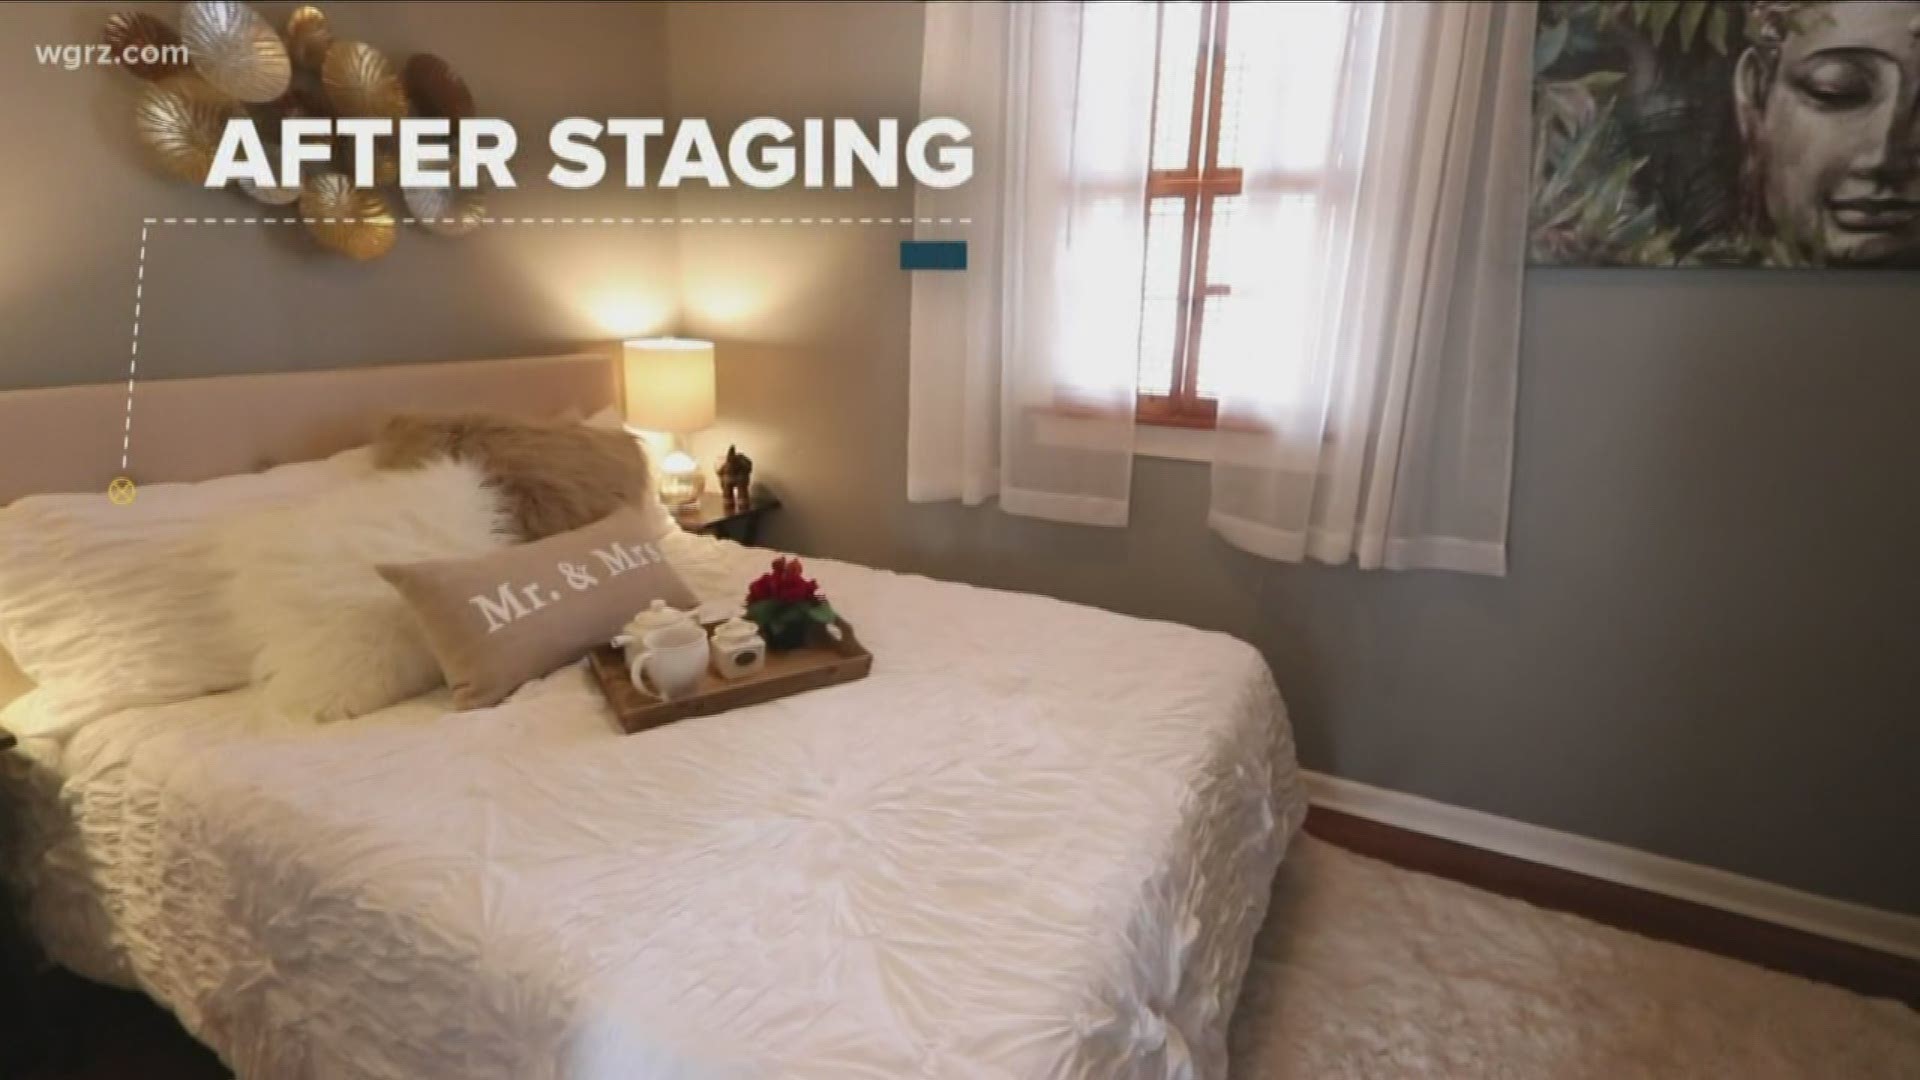 Home stager Suzanne Tomasello shows how she transformed an $89,000 home in Cheektowaga